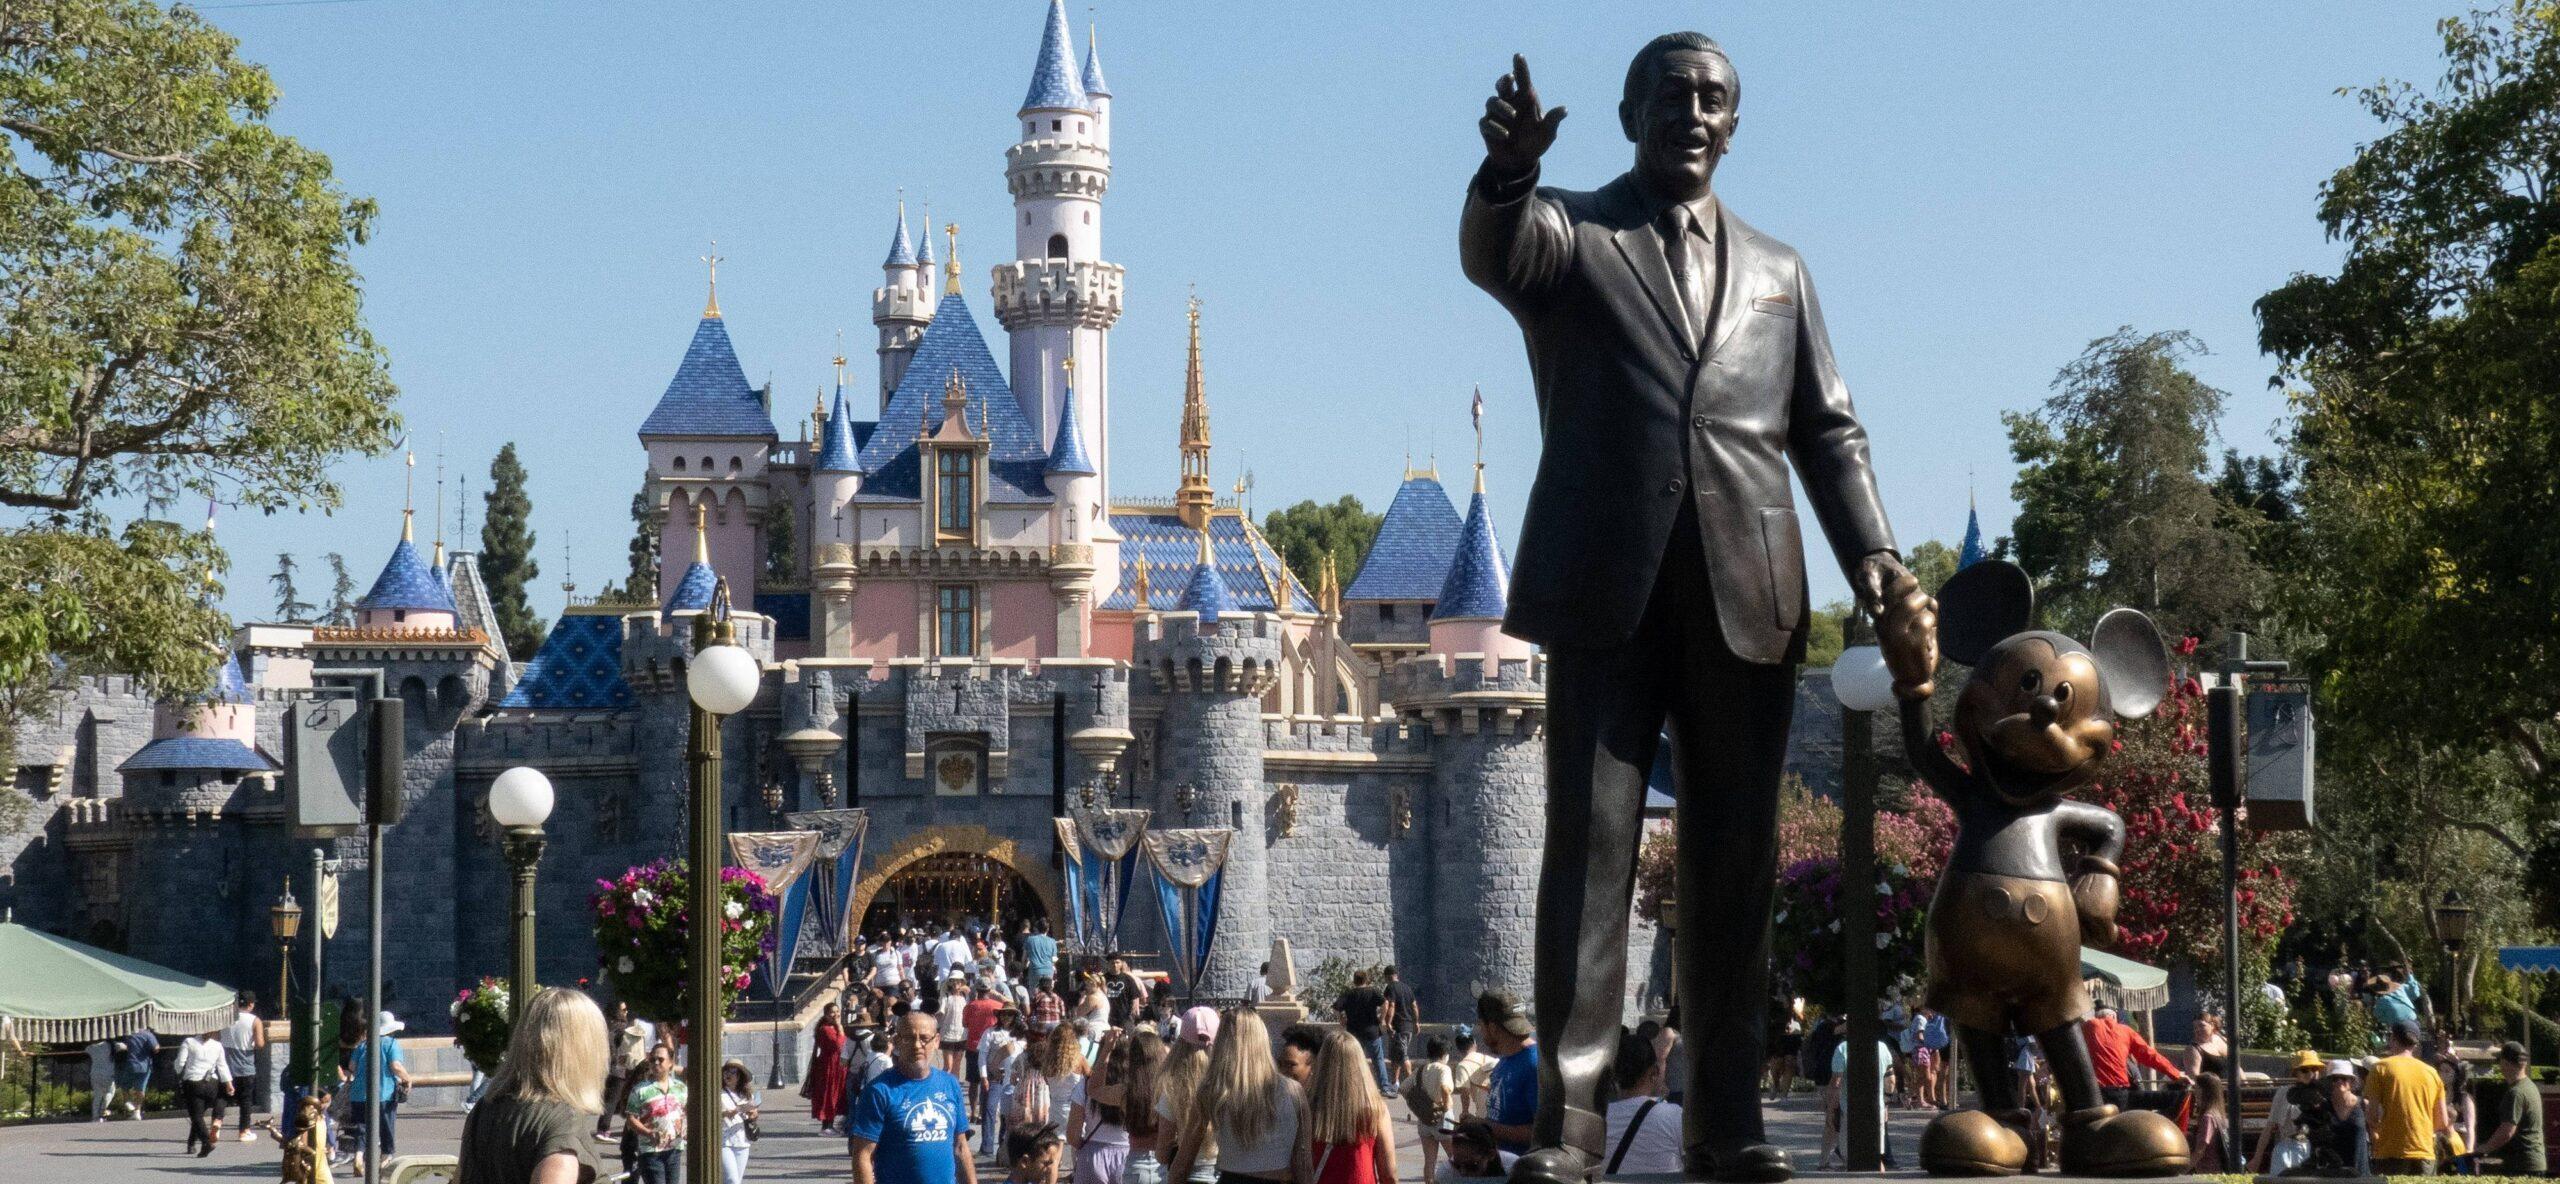 81-Year-Old Man Sues Disneyland Over Alleged Security Dog Attack